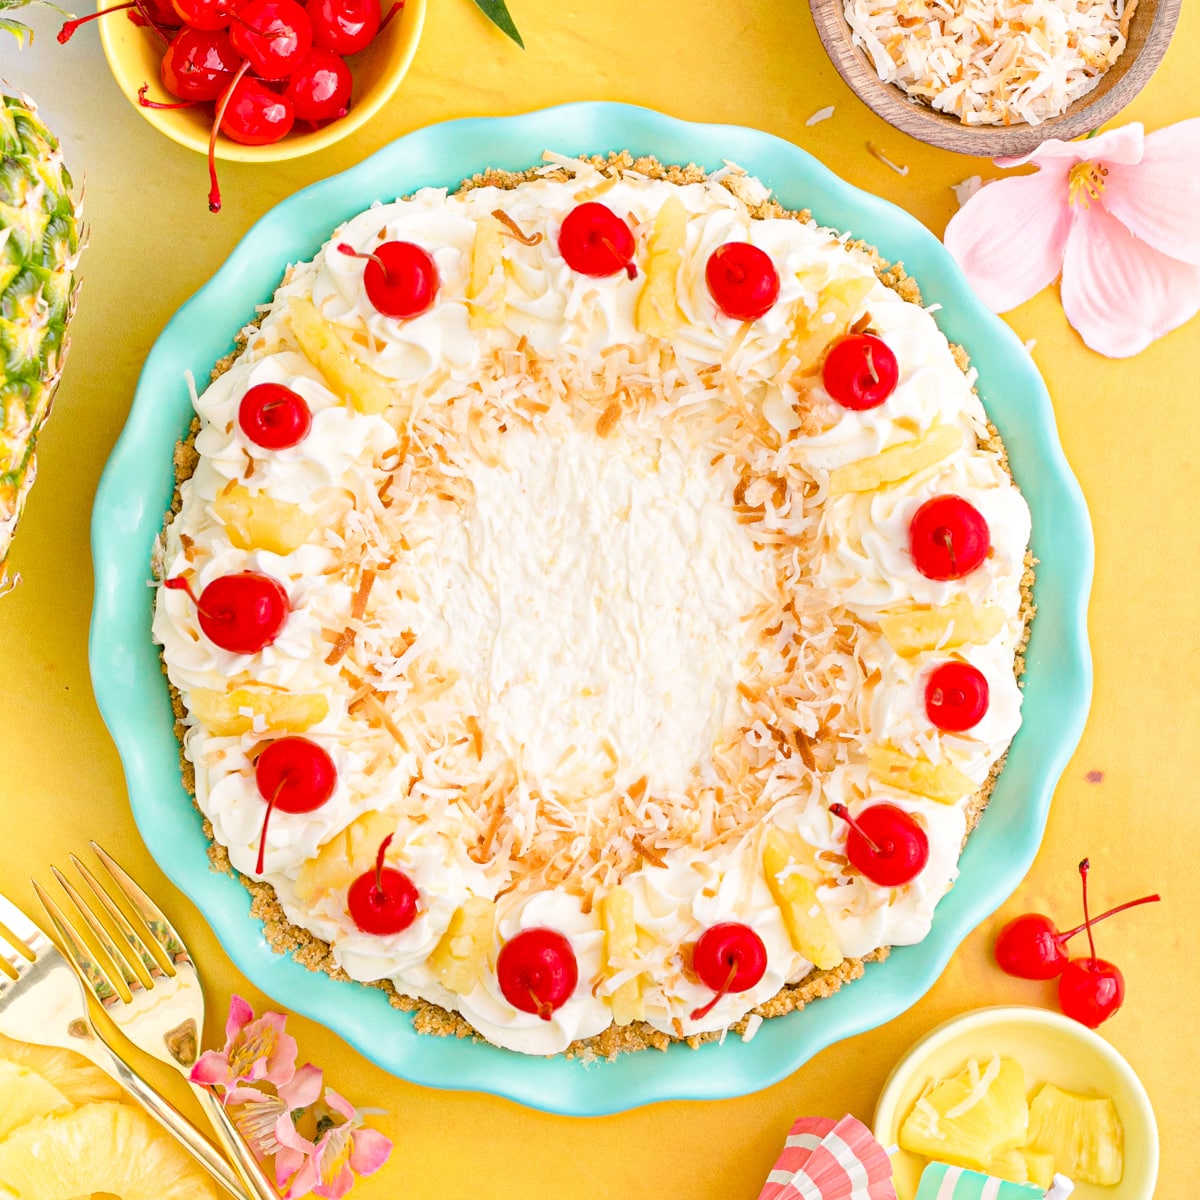 Pina colada pie in a teal pie dish with cherries, toasted coconut and pineapple slices.